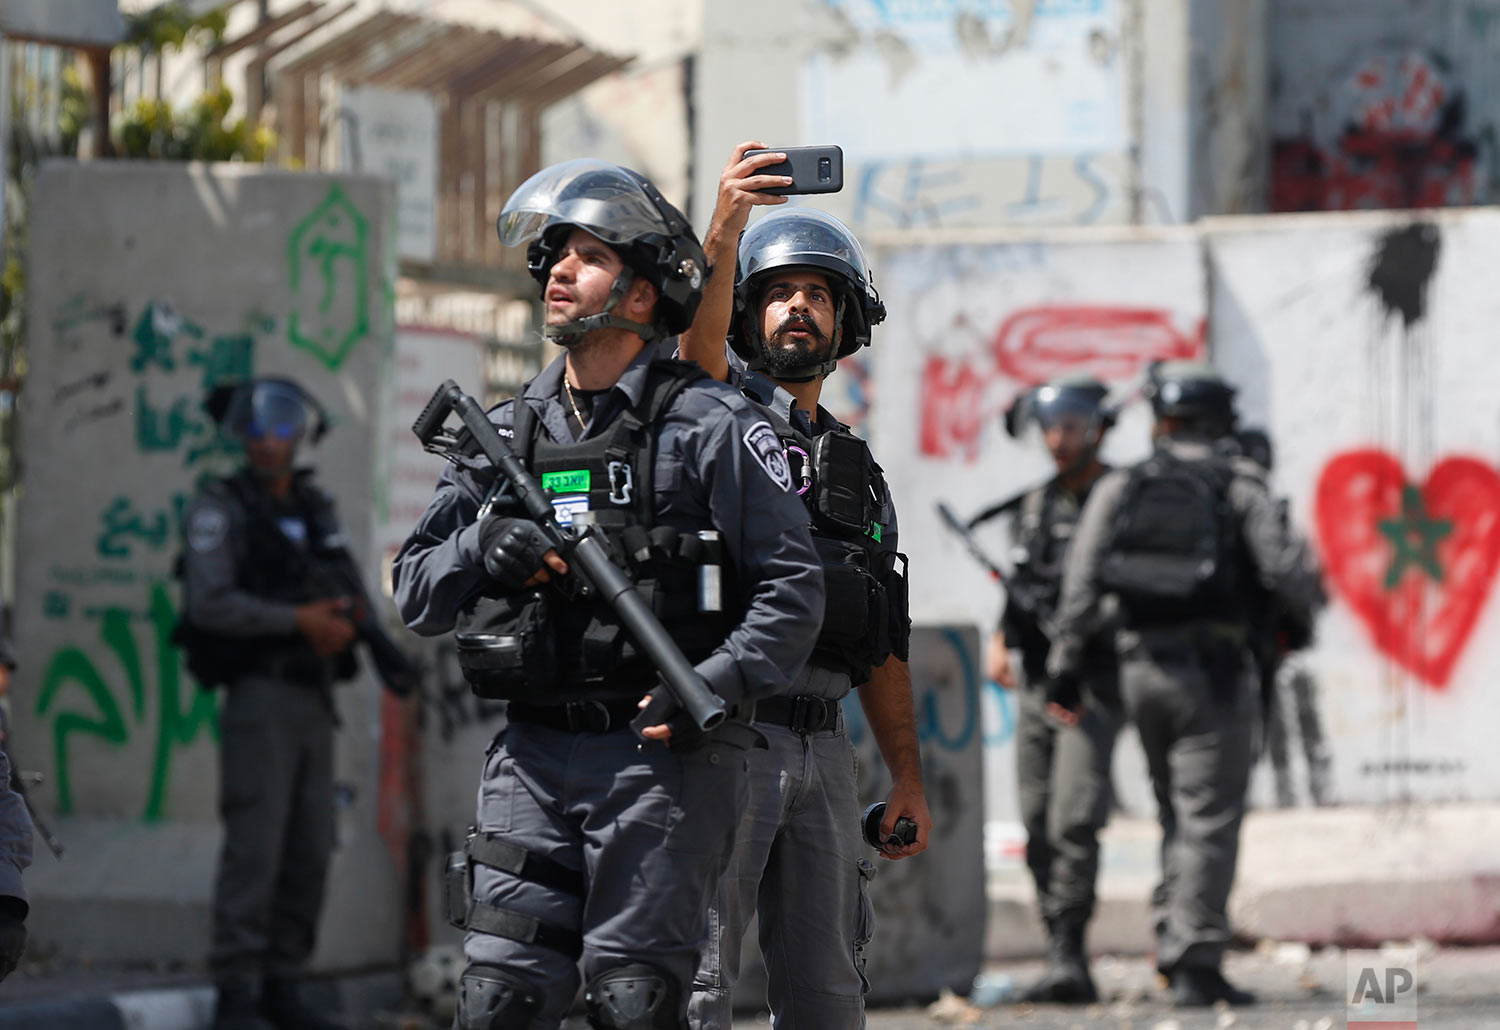 An Israeli border policeman takes a selfie during clashes in the West Bank city of Bethlehem, Friday, July 21, 2017. (AP Photo/Nasser Shiyoukhi)